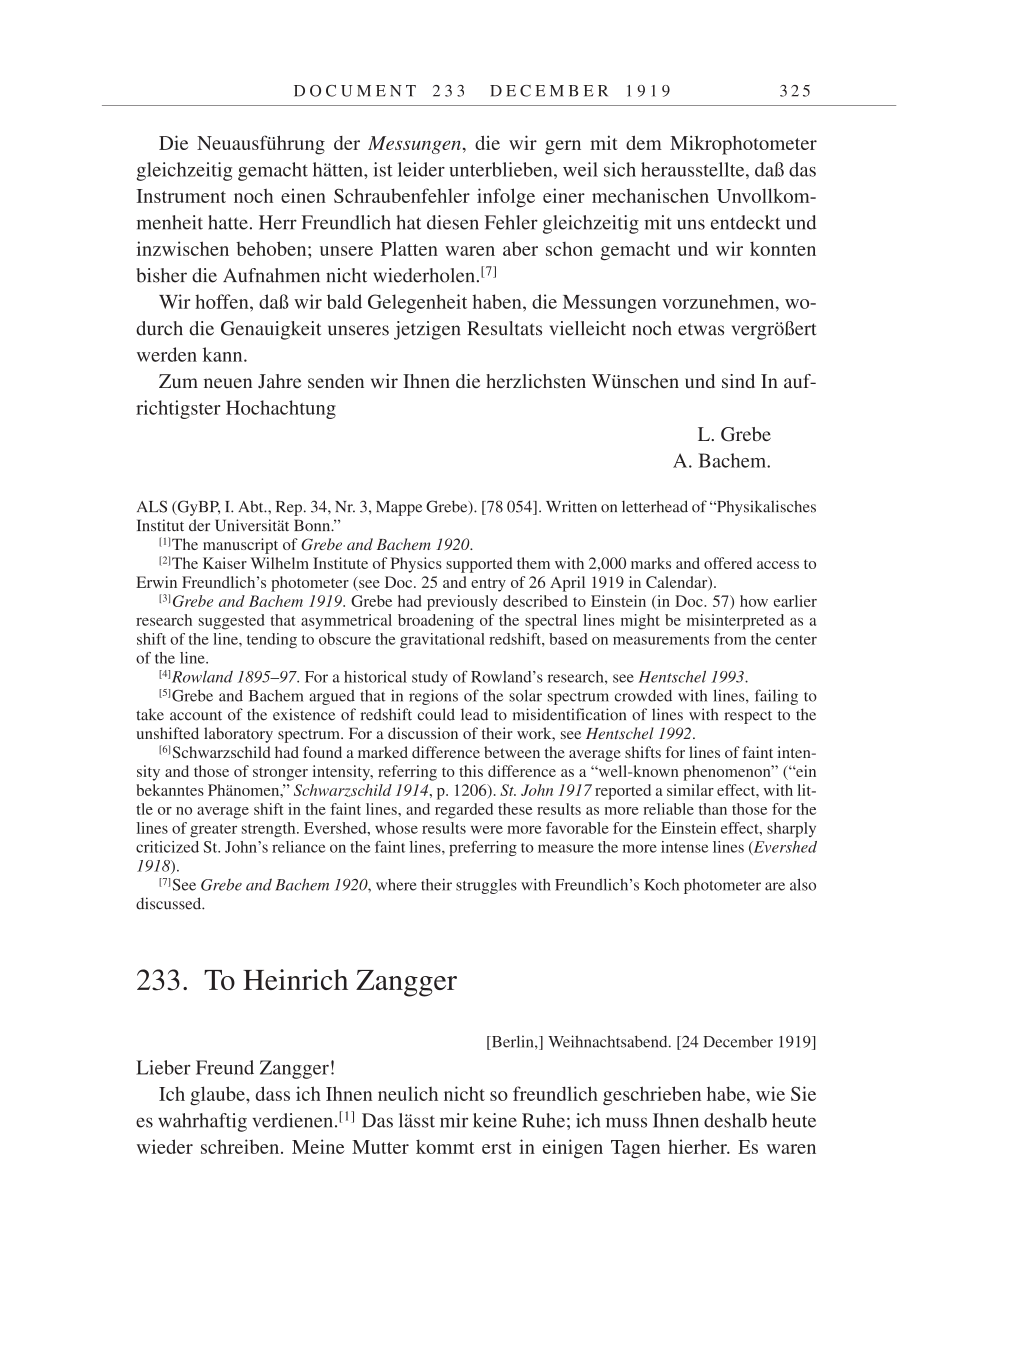 Volume 9: The Berlin Years: Correspondence January 1919-April 1920 page 325